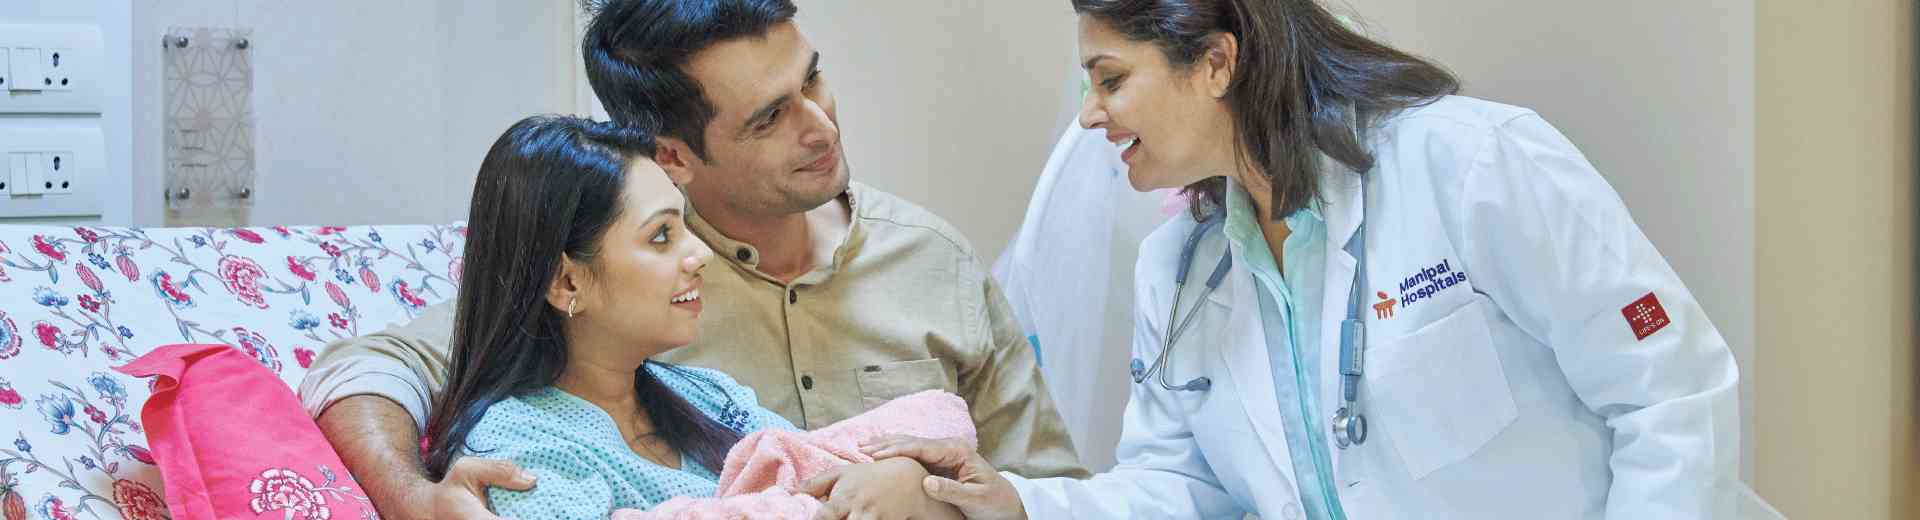 Clinical services offered at the Centre of Excellence in Paediatrics & Child Care in Kolkata